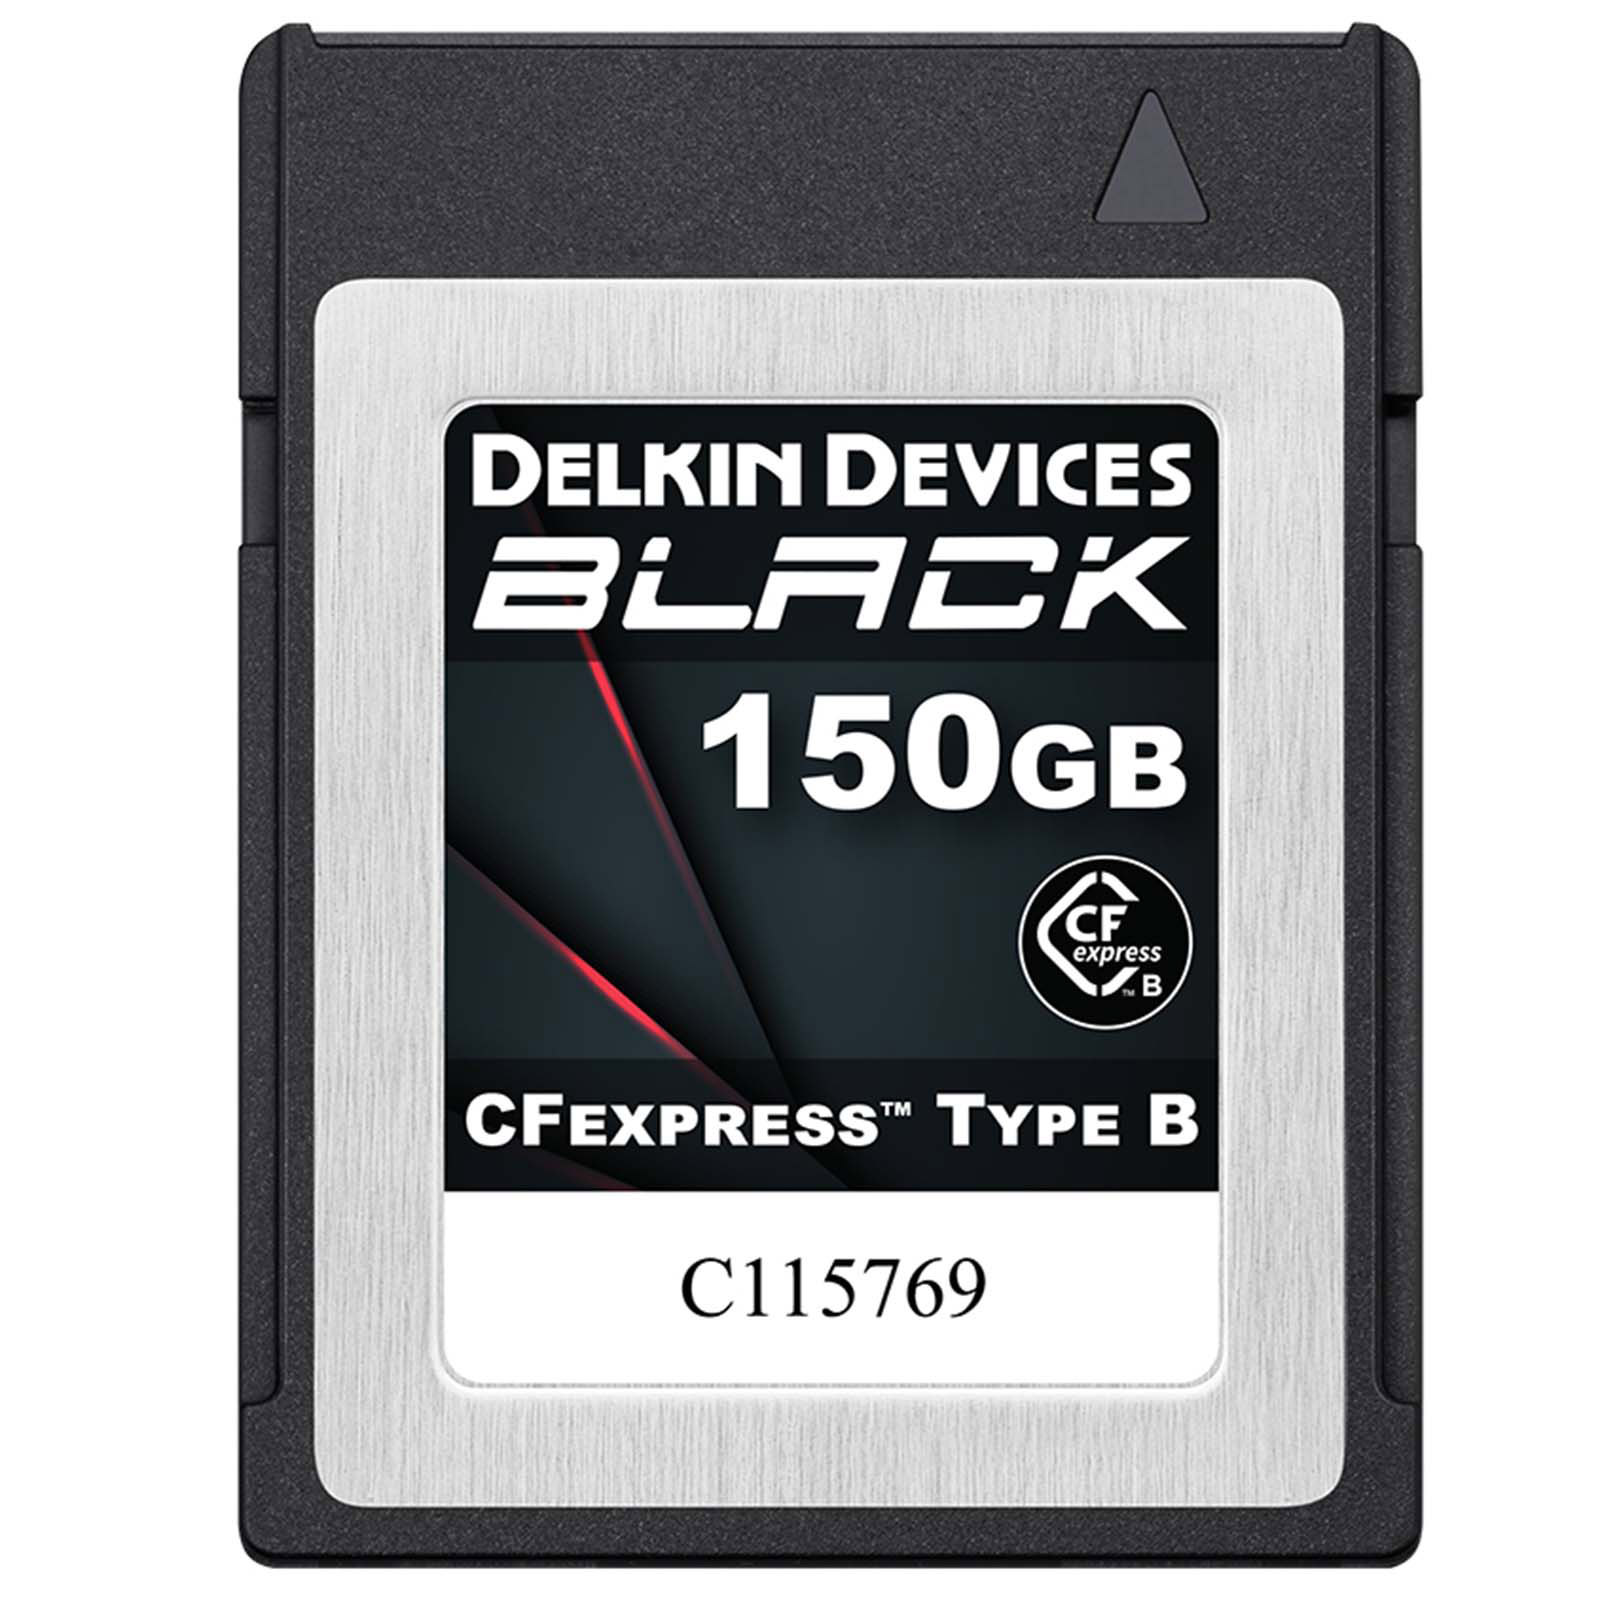 Image of Delkin BLACK 150GB (1725MB/s) Cfexpress Type B Memory Card